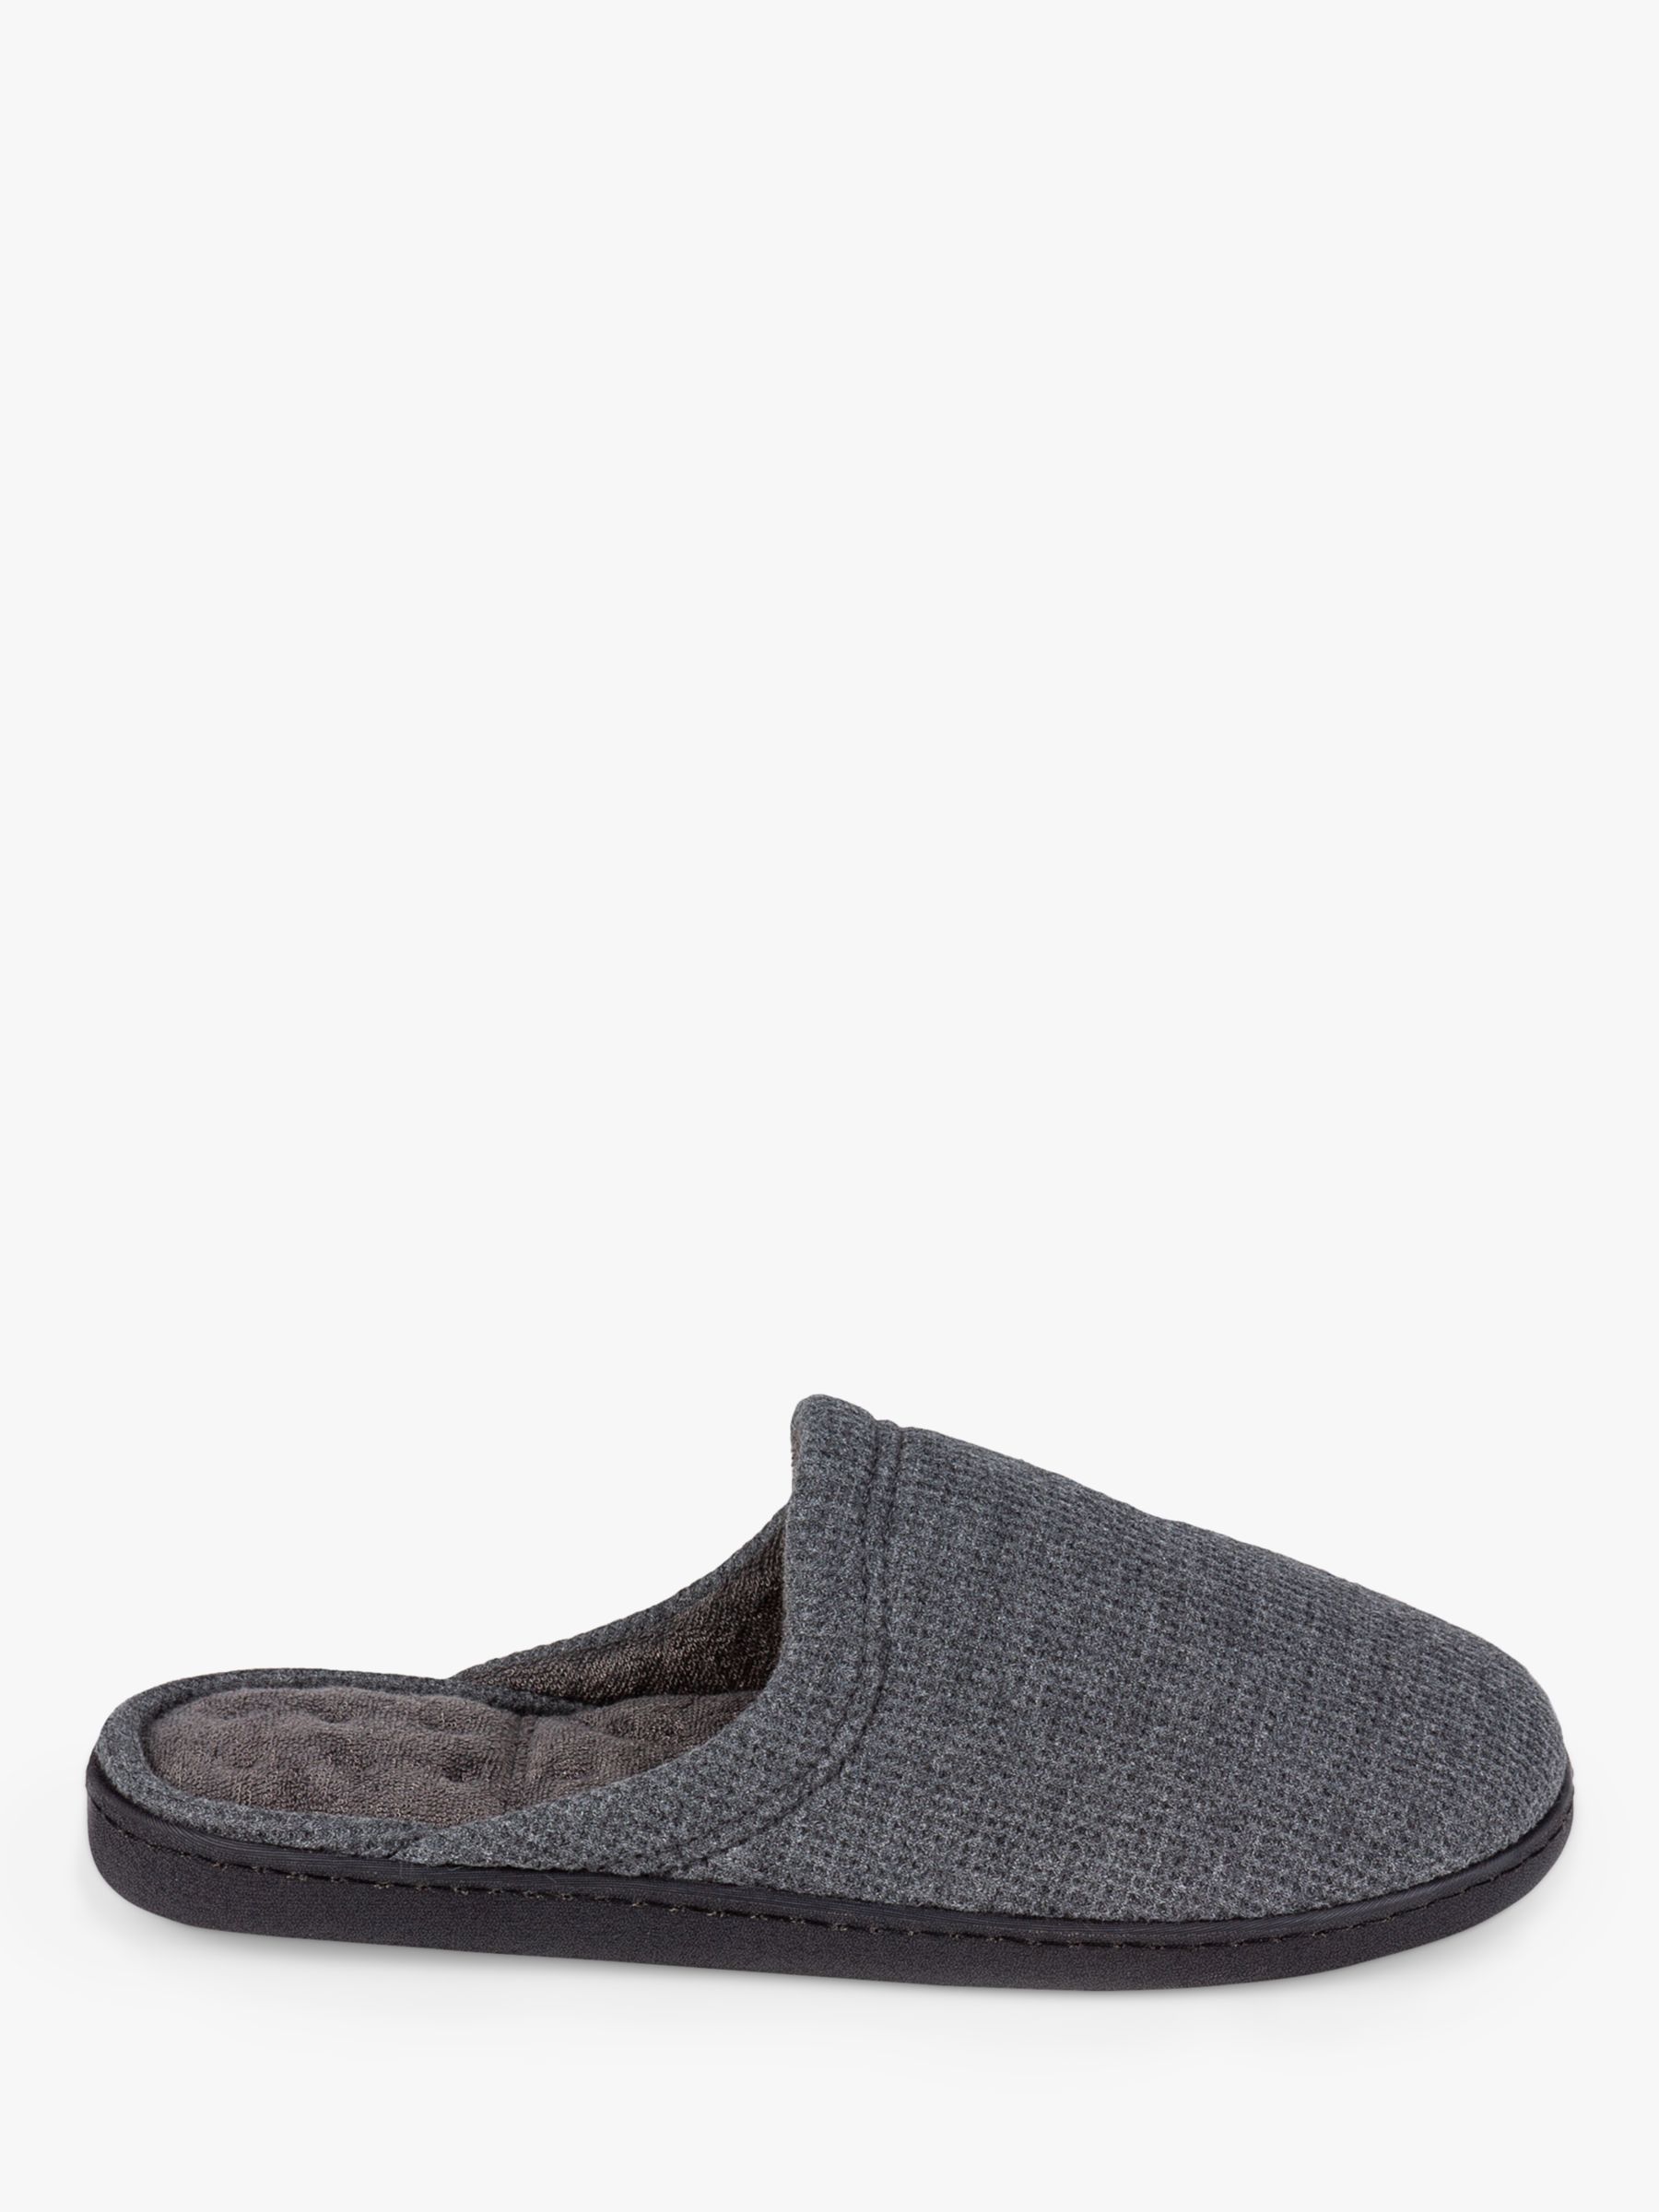 totes Waffle Mule Slippers